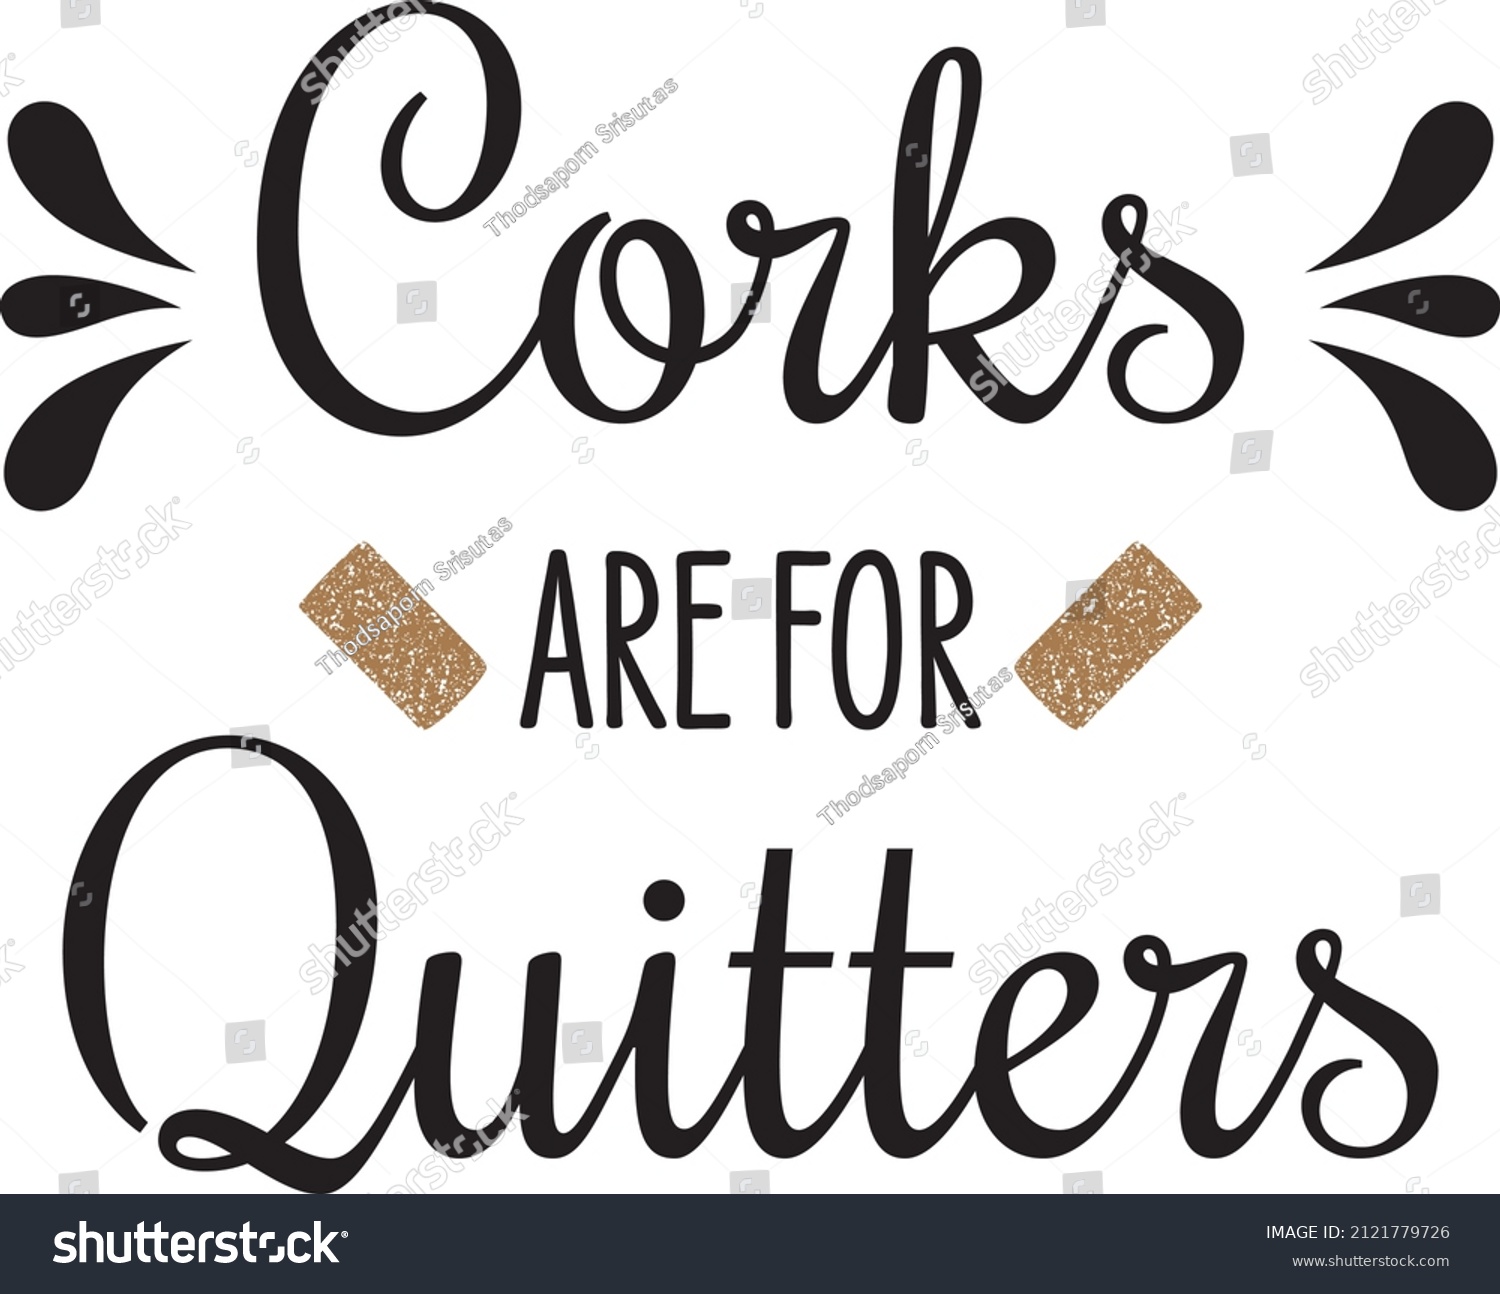 SVG of Corks Are For Quitters, illustration vector graphic svg